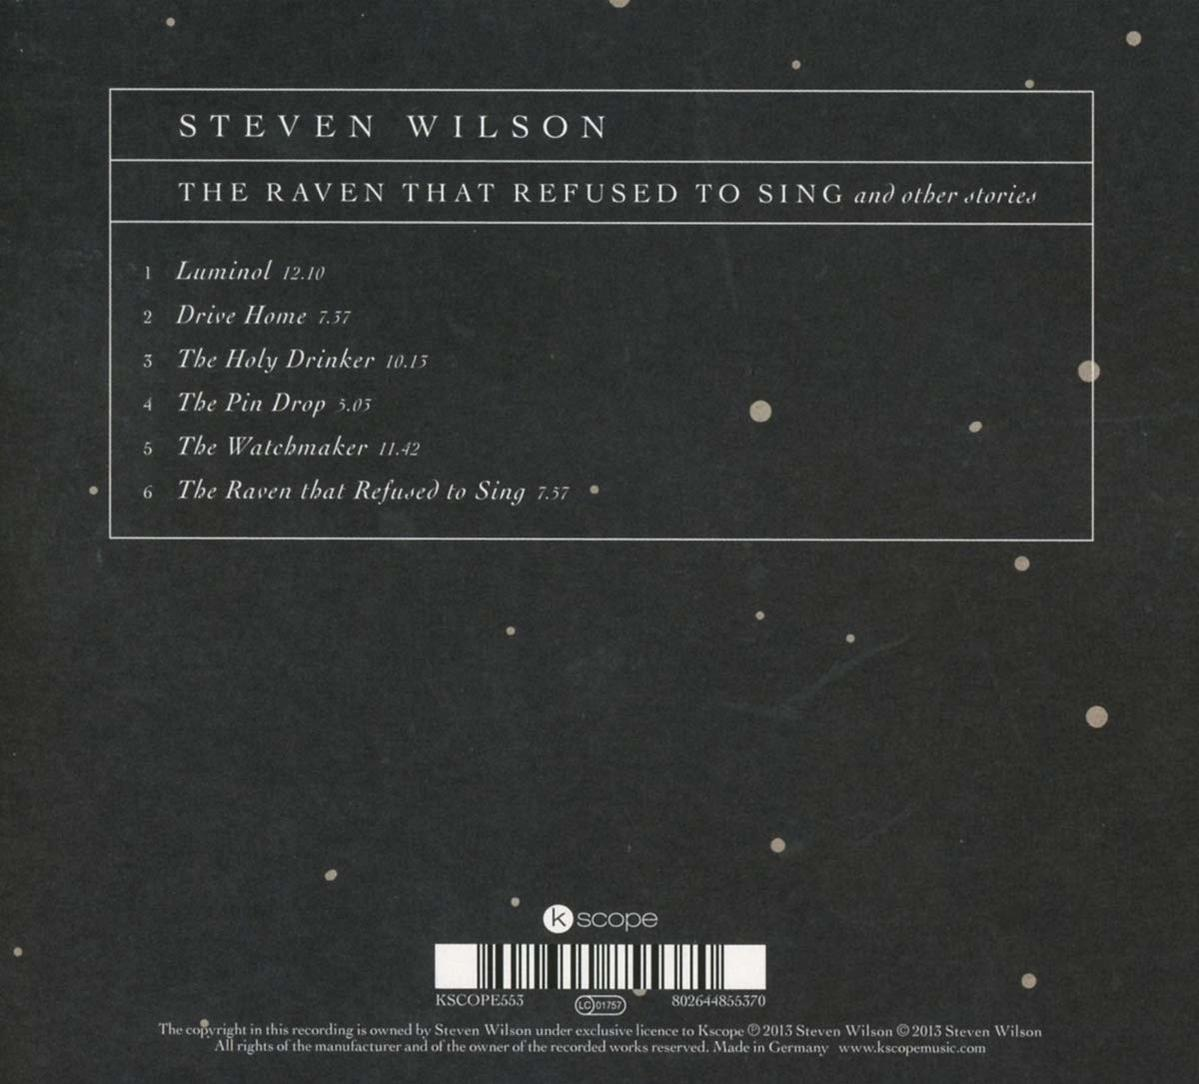 (CD Steven Sing That Raven - The - + Blu-ray Refused To Disc) Wilson